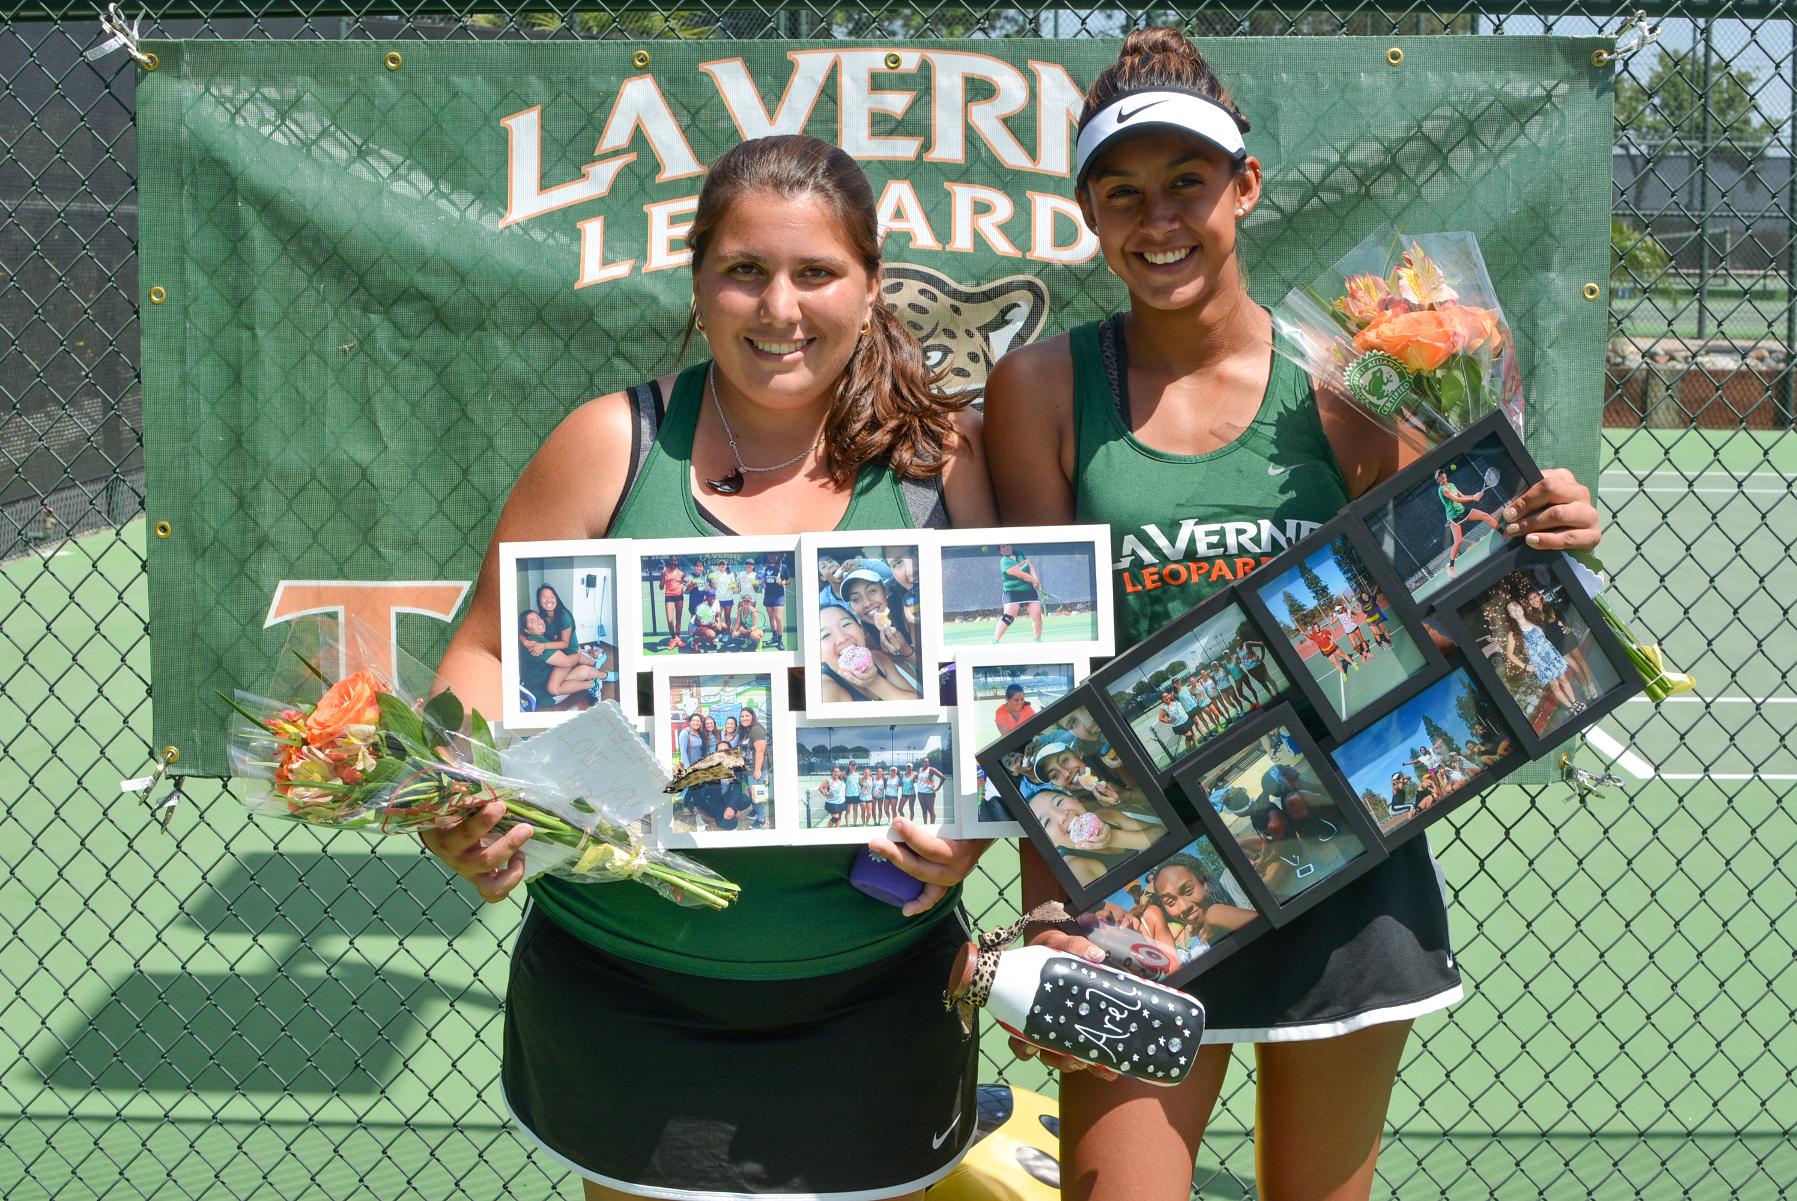 Tennis drops to Cal Lutheran on Senior Day